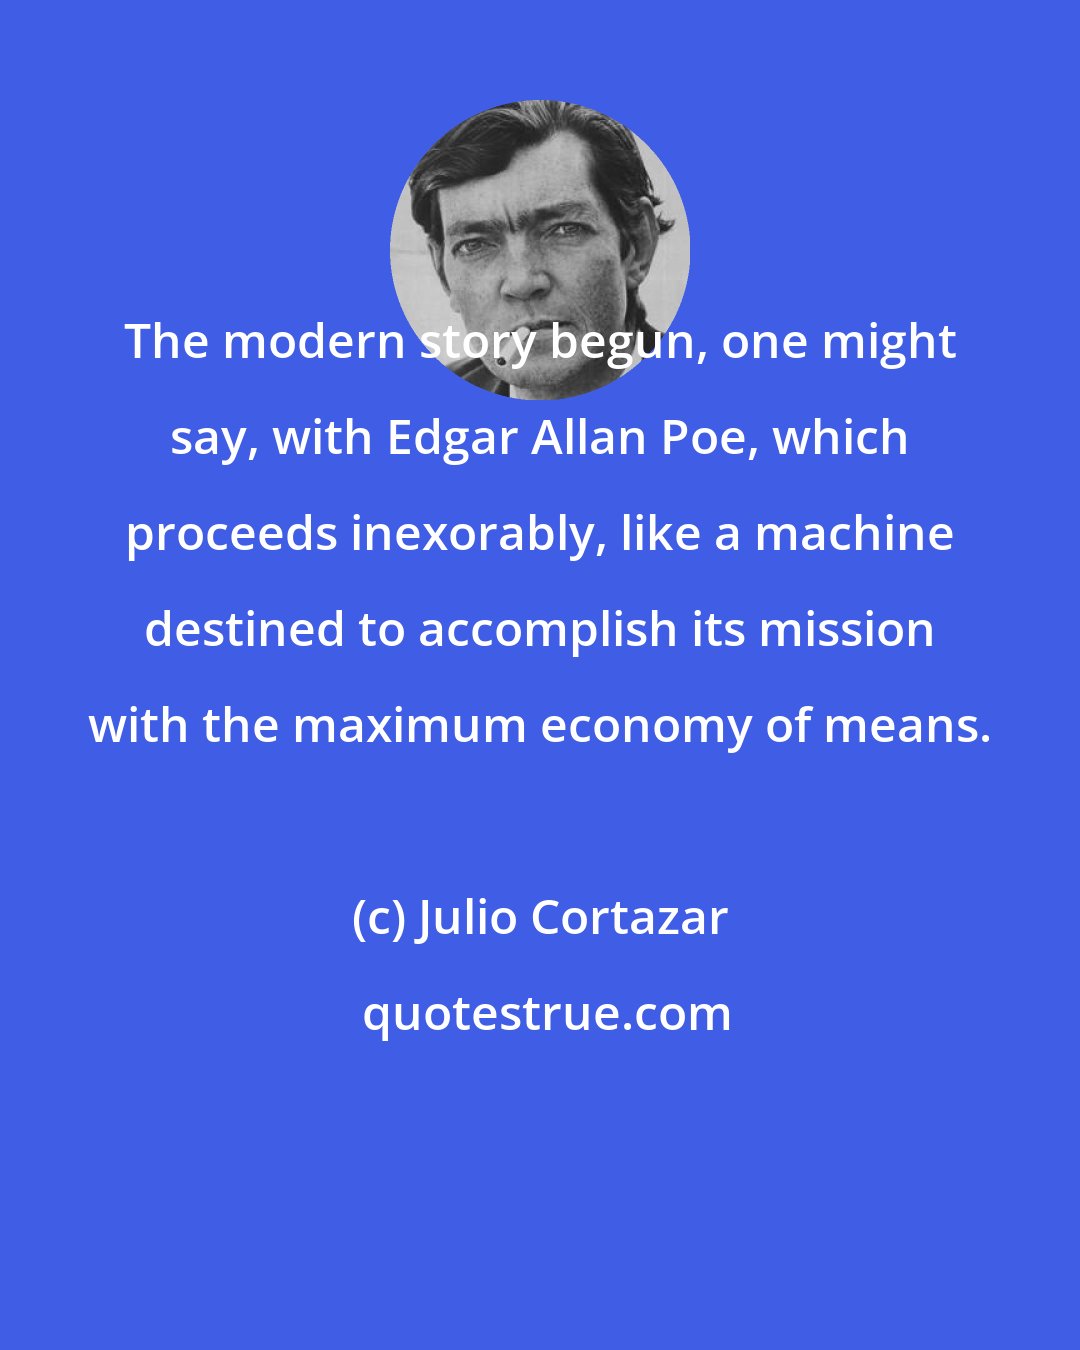 Julio Cortazar: The modern story begun, one might say, with Edgar Allan Poe, which proceeds inexorably, like a machine destined to accomplish its mission with the maximum economy of means.